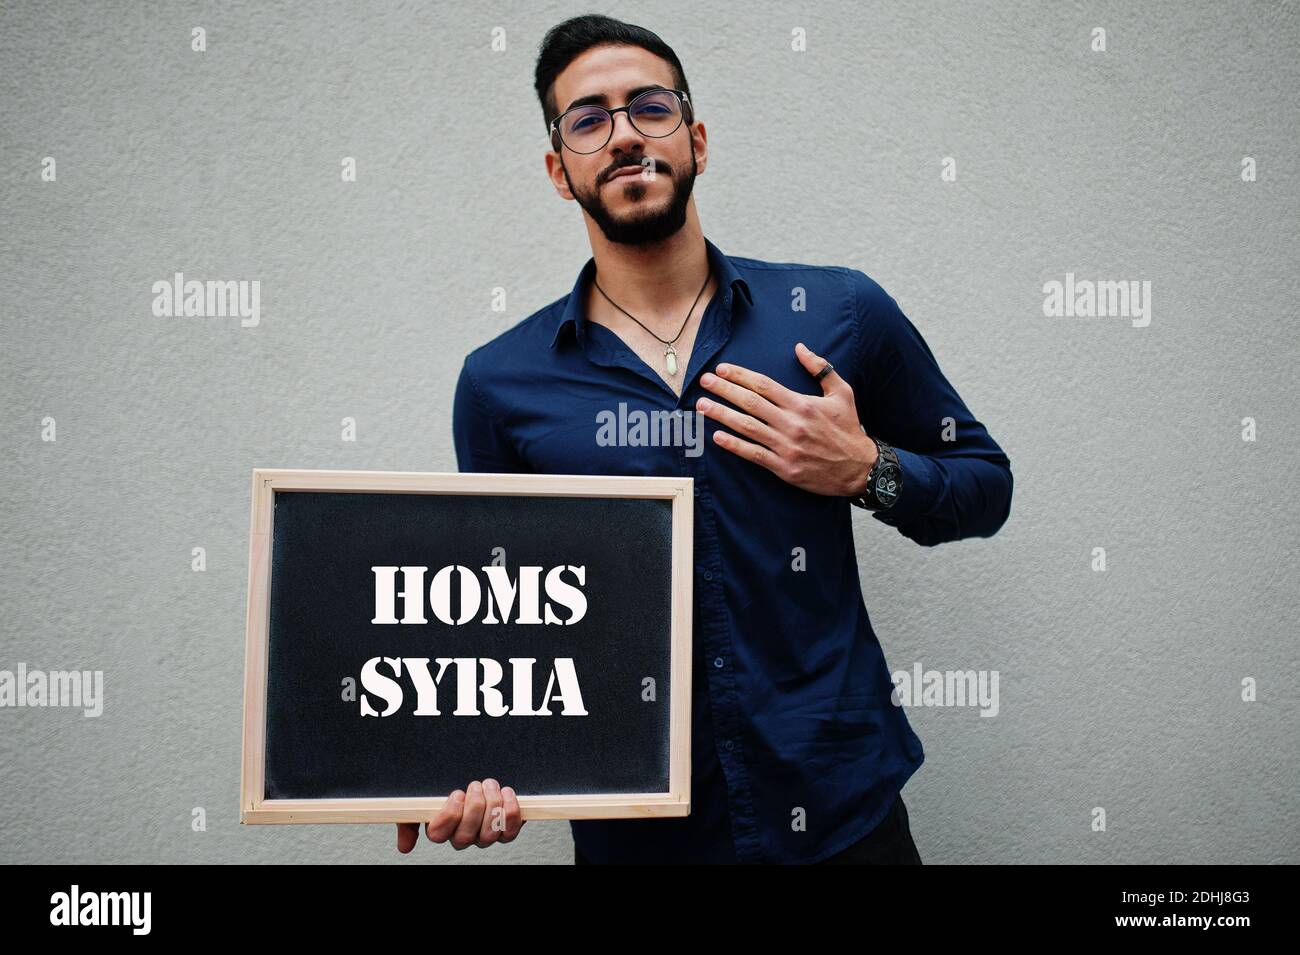 Arab man wear blue shirt and eyeglasses hold board with Homs Syria inscription. Largest cities in islamic world concept. Stock Photo